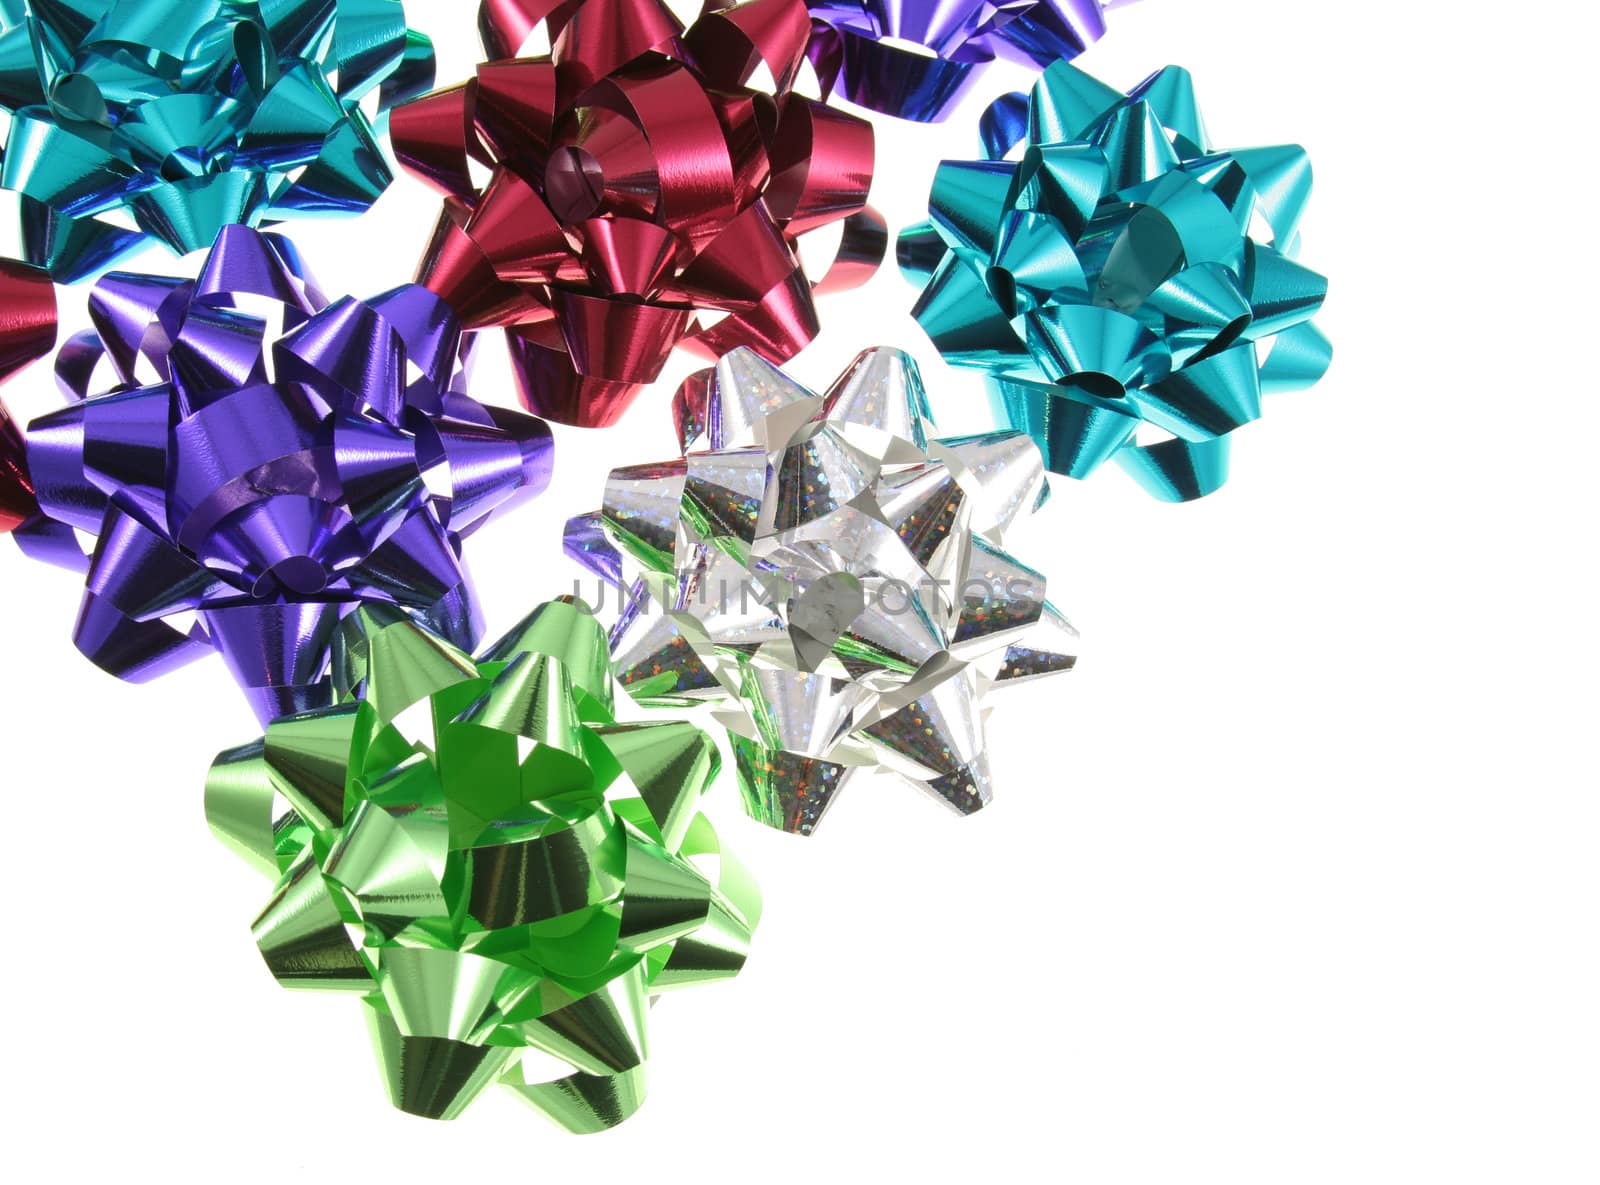 Bunch of Christmas Gift Bows
 by ca2hill